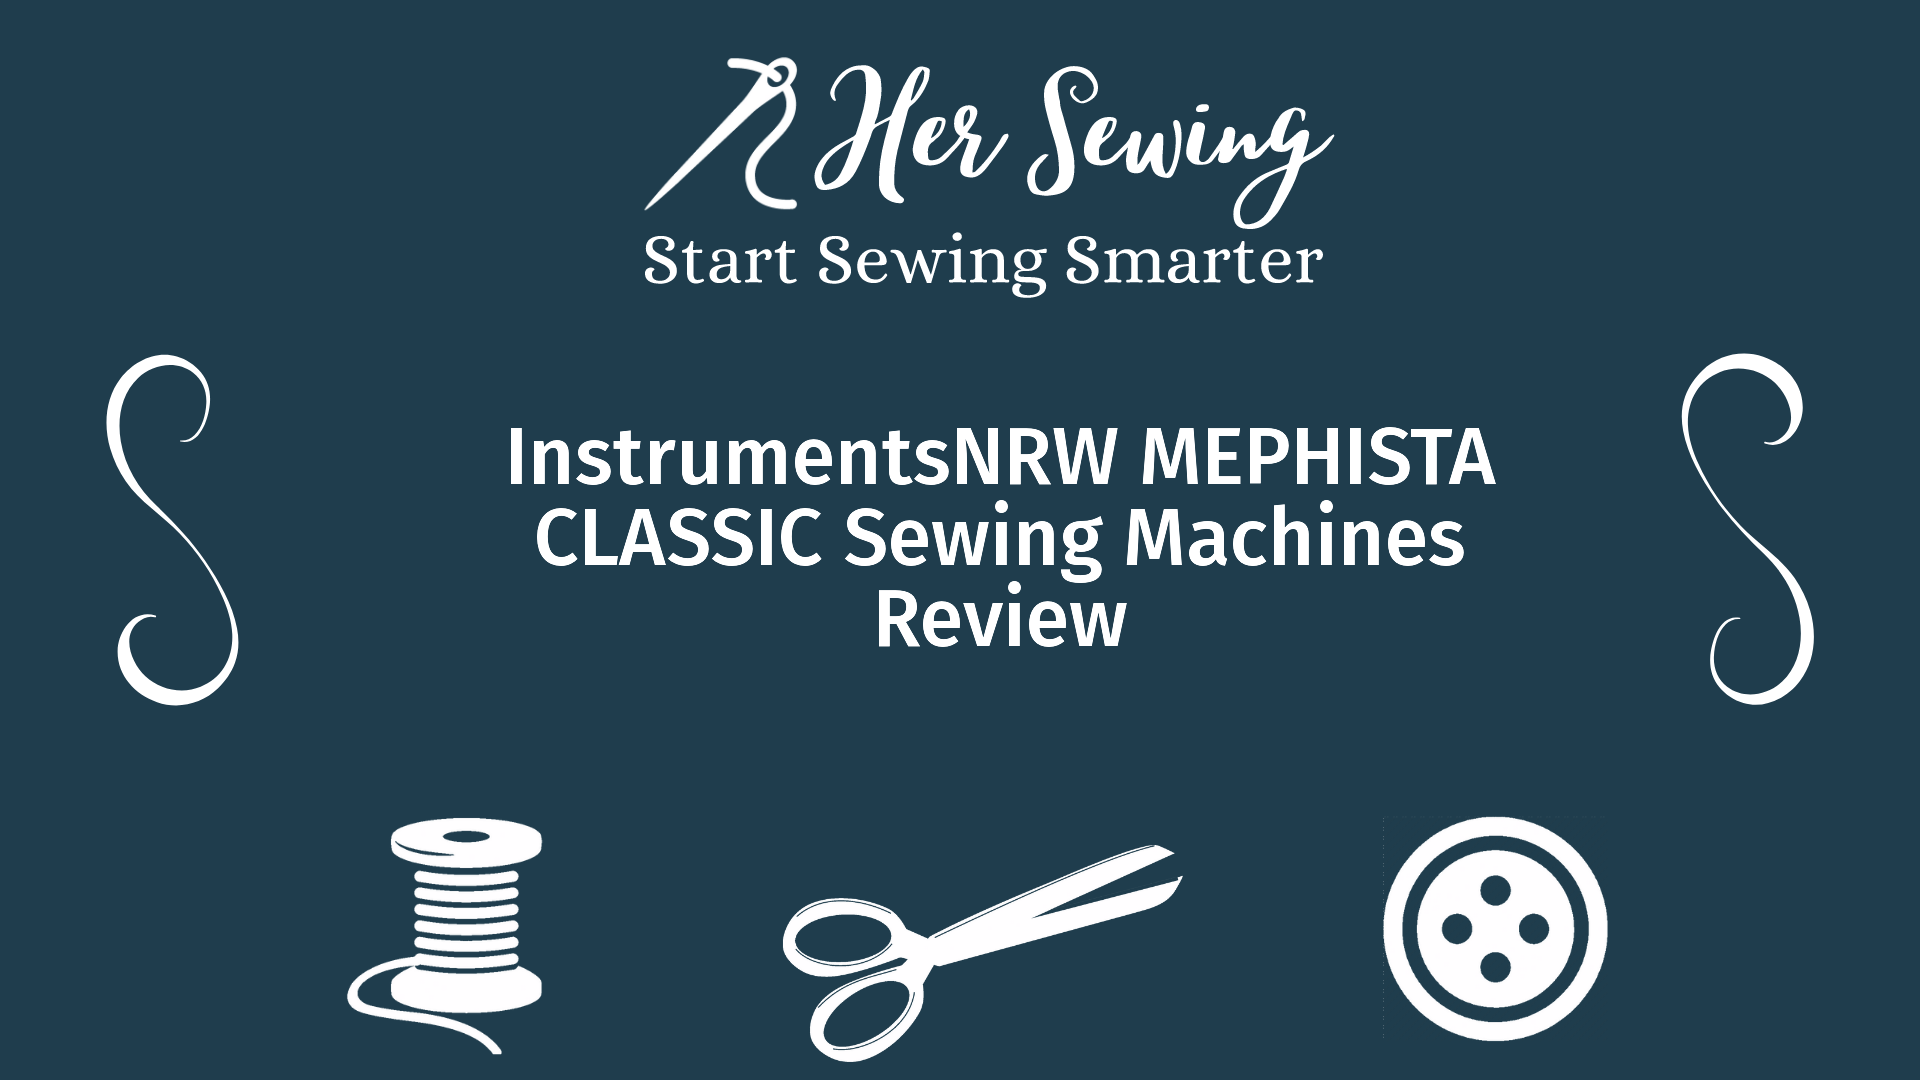 InstrumentsNRW MEPHISTA CLASSIC Sewing Machines Review